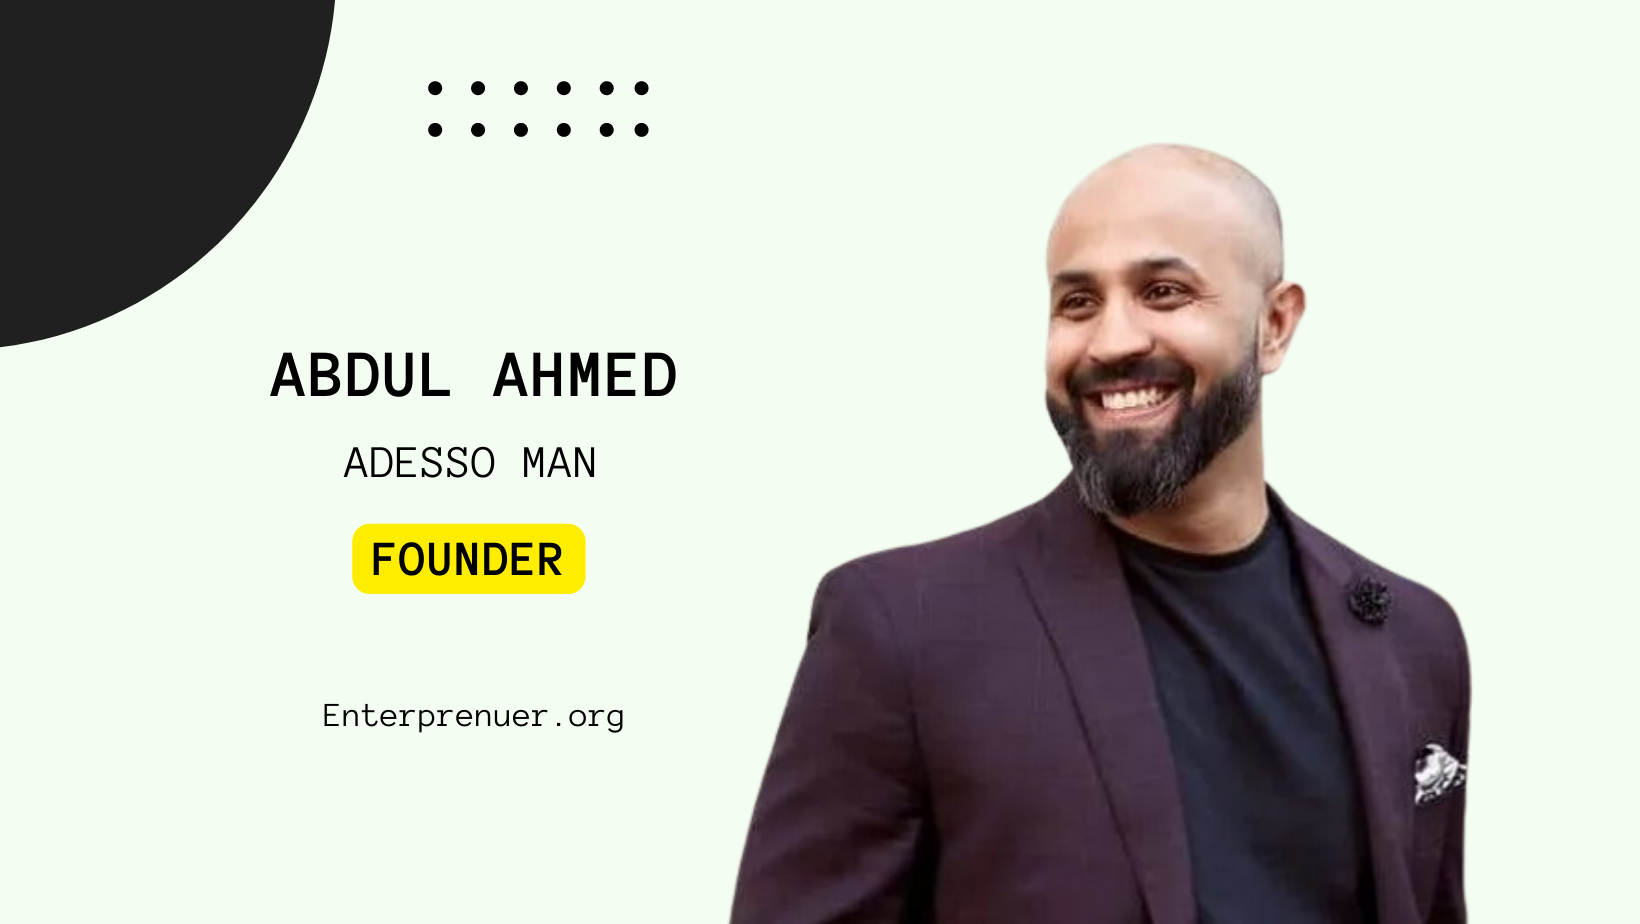 Abdul Ahmed CEO of Adesso Man